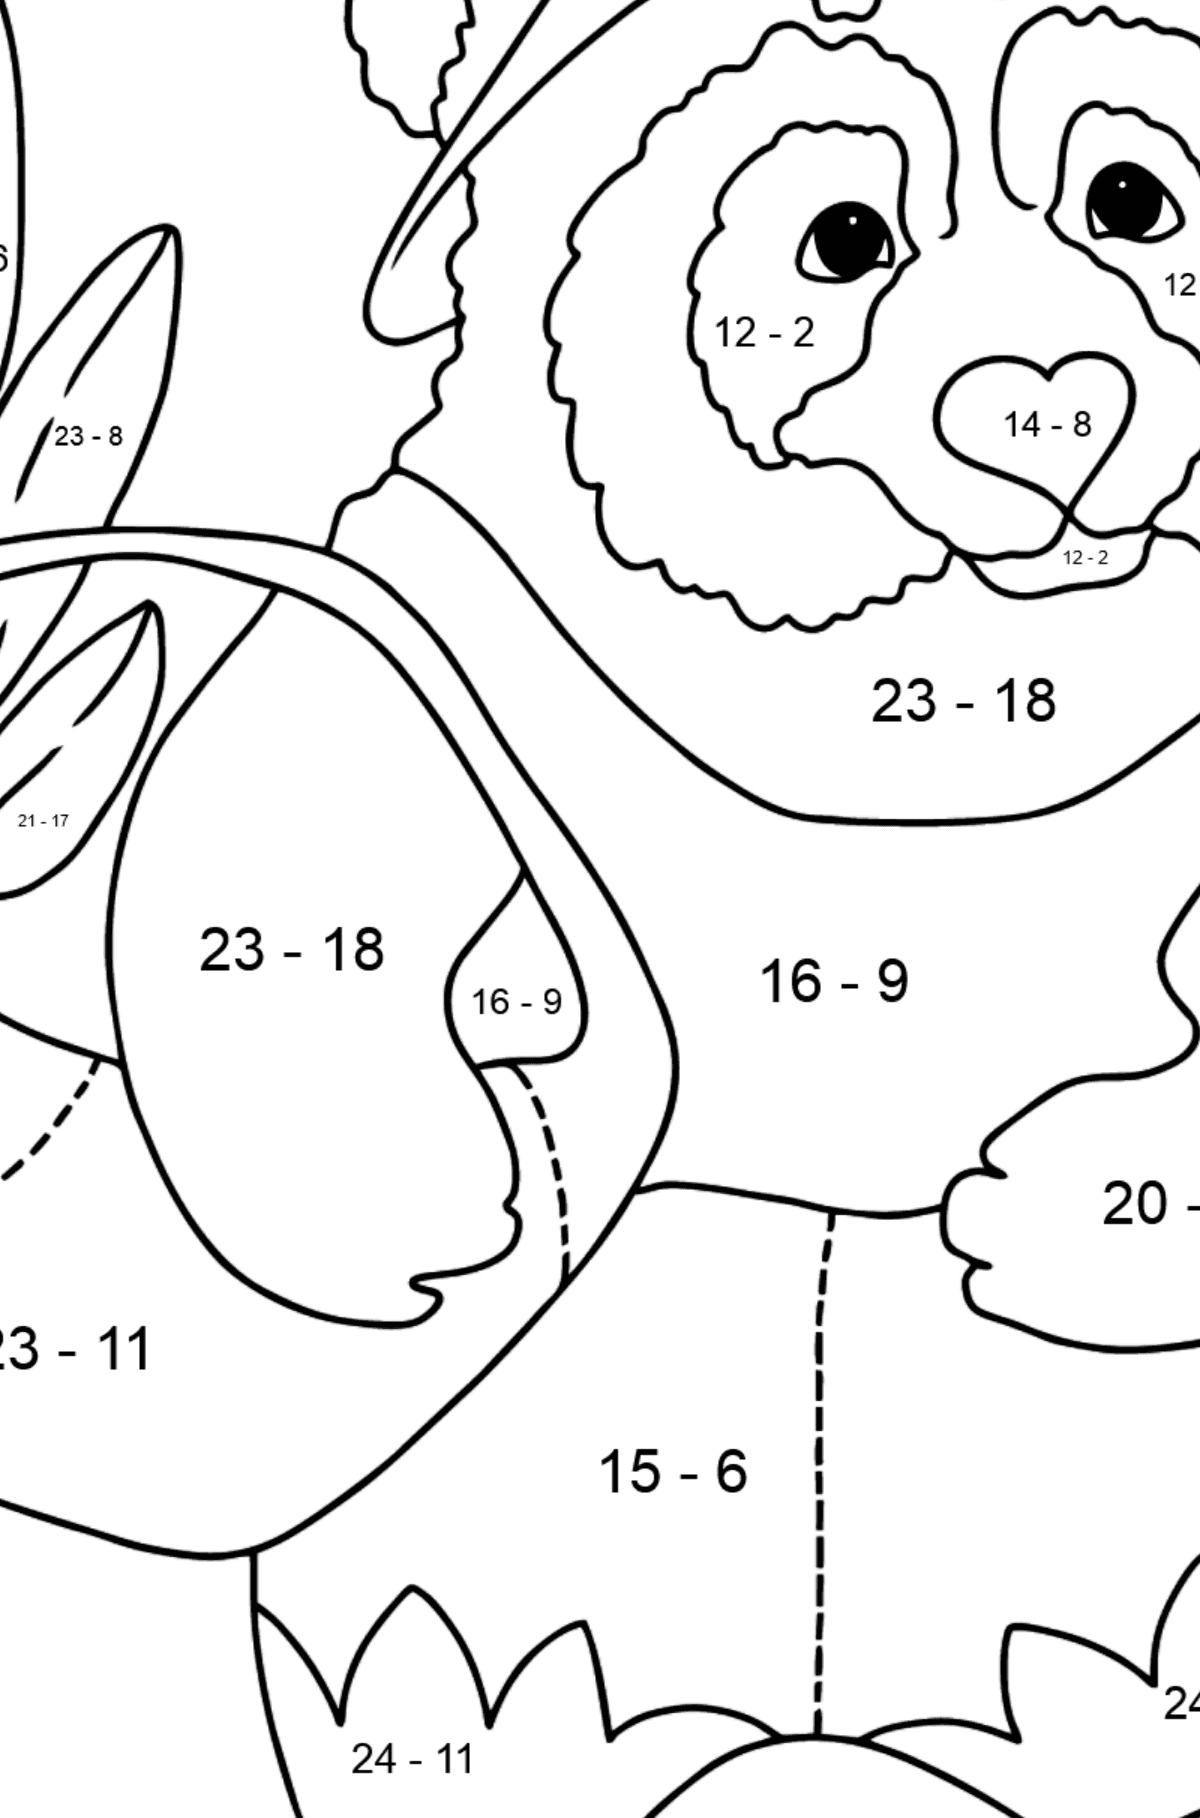 Kind Panda coloring page - Math Coloring - Subtraction for Kids